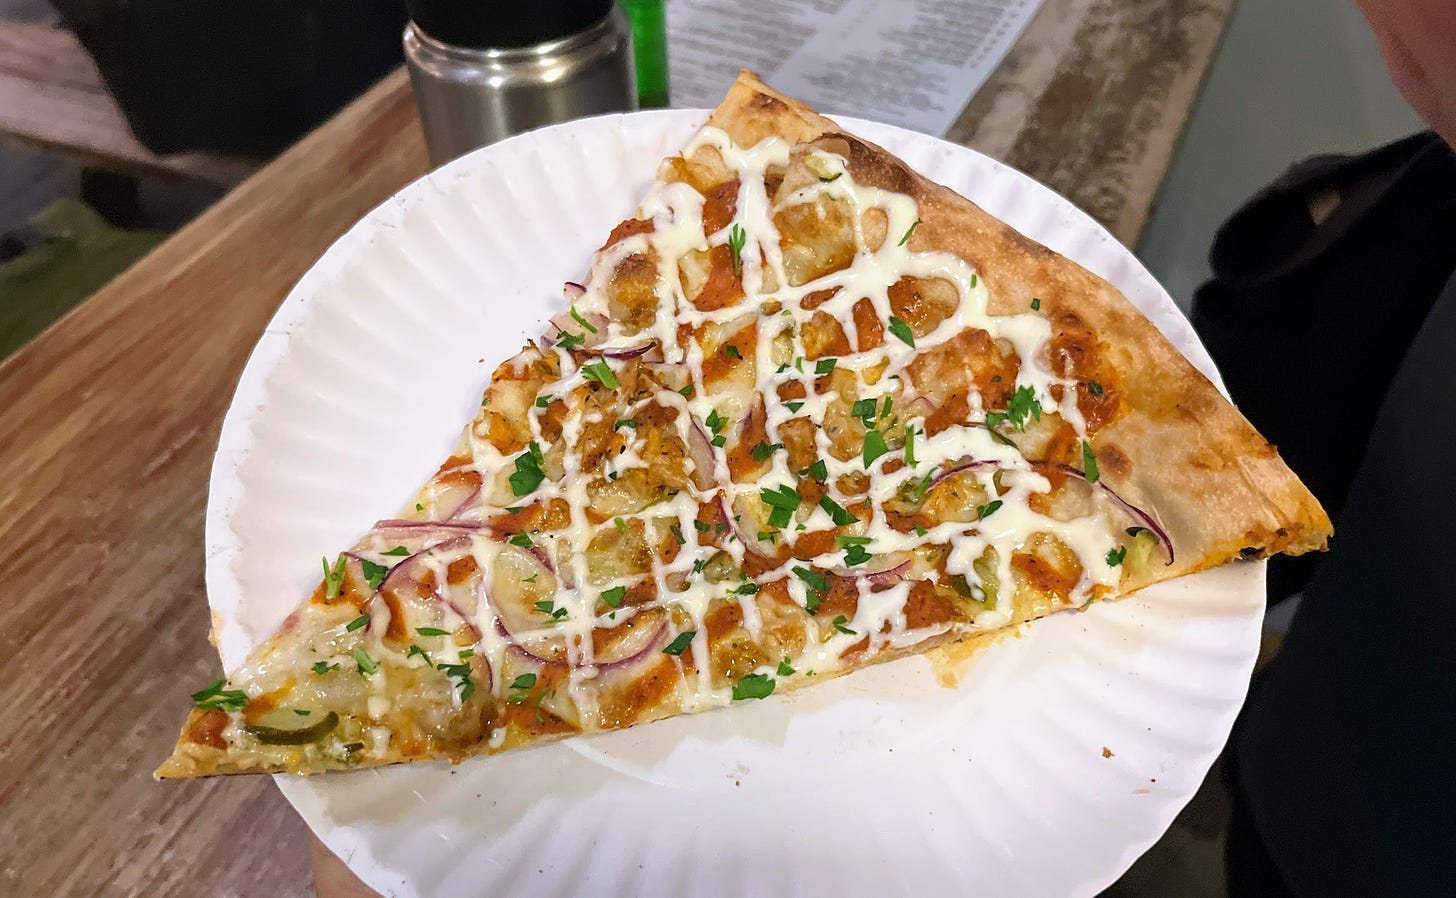 Chicken shawarma pizza on a paper plate